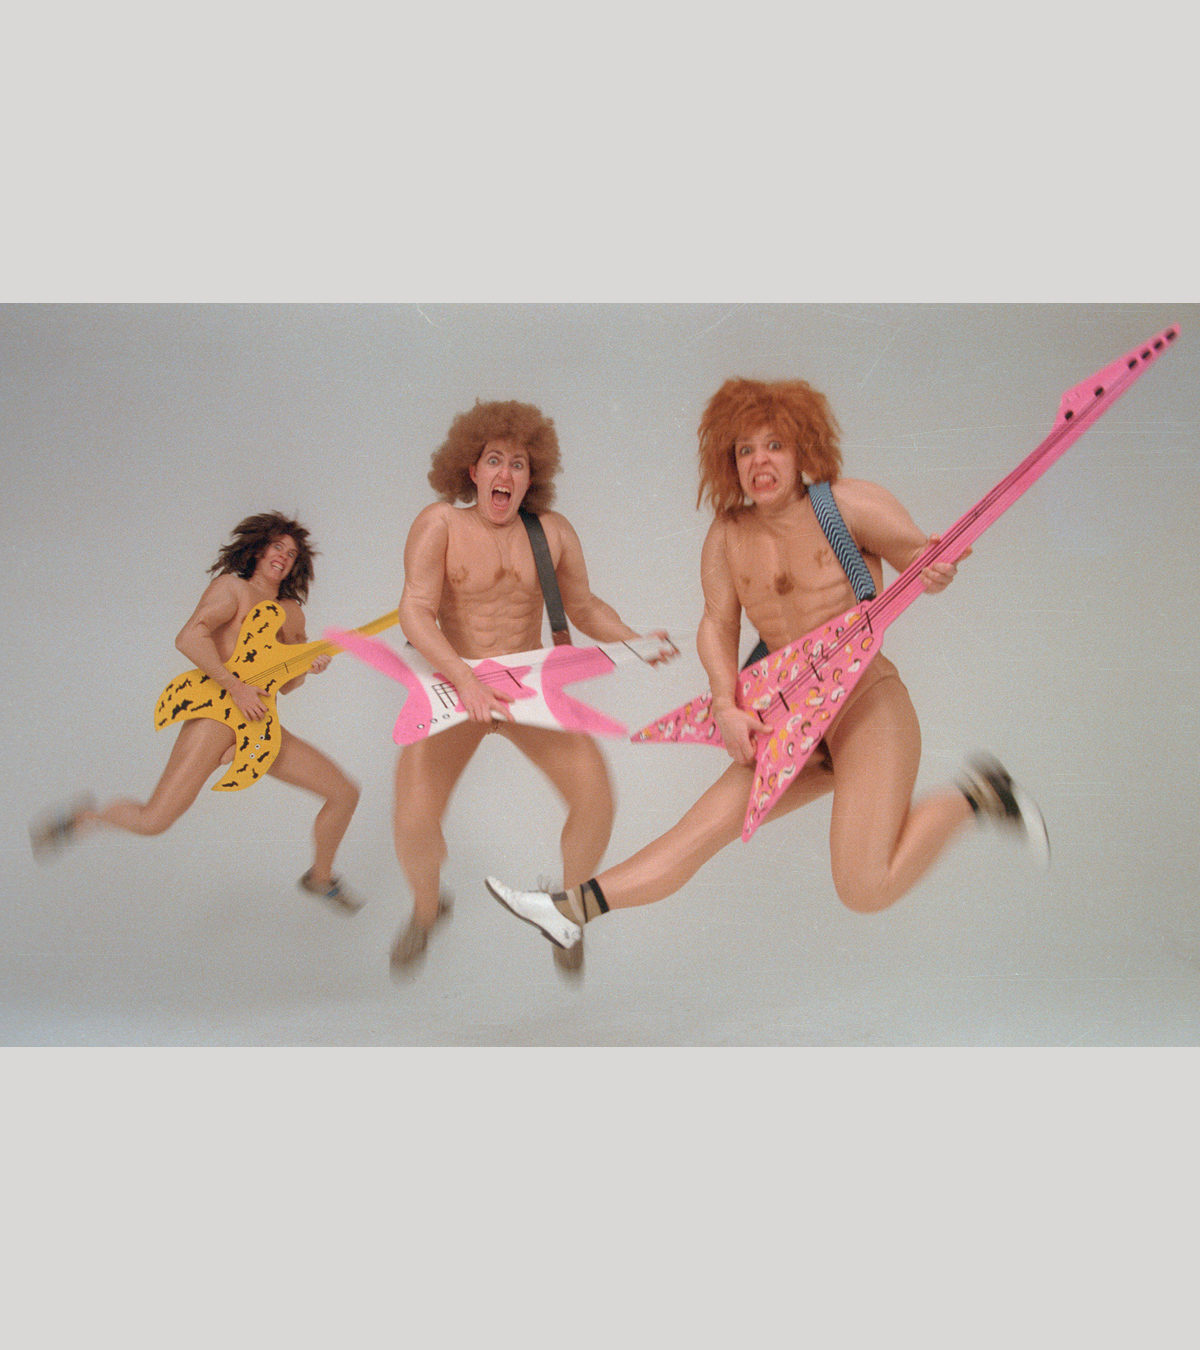 A photo of The Clichettes dressed as muscular men with wild hair, they are jumping mid-air holding colourful guitars.